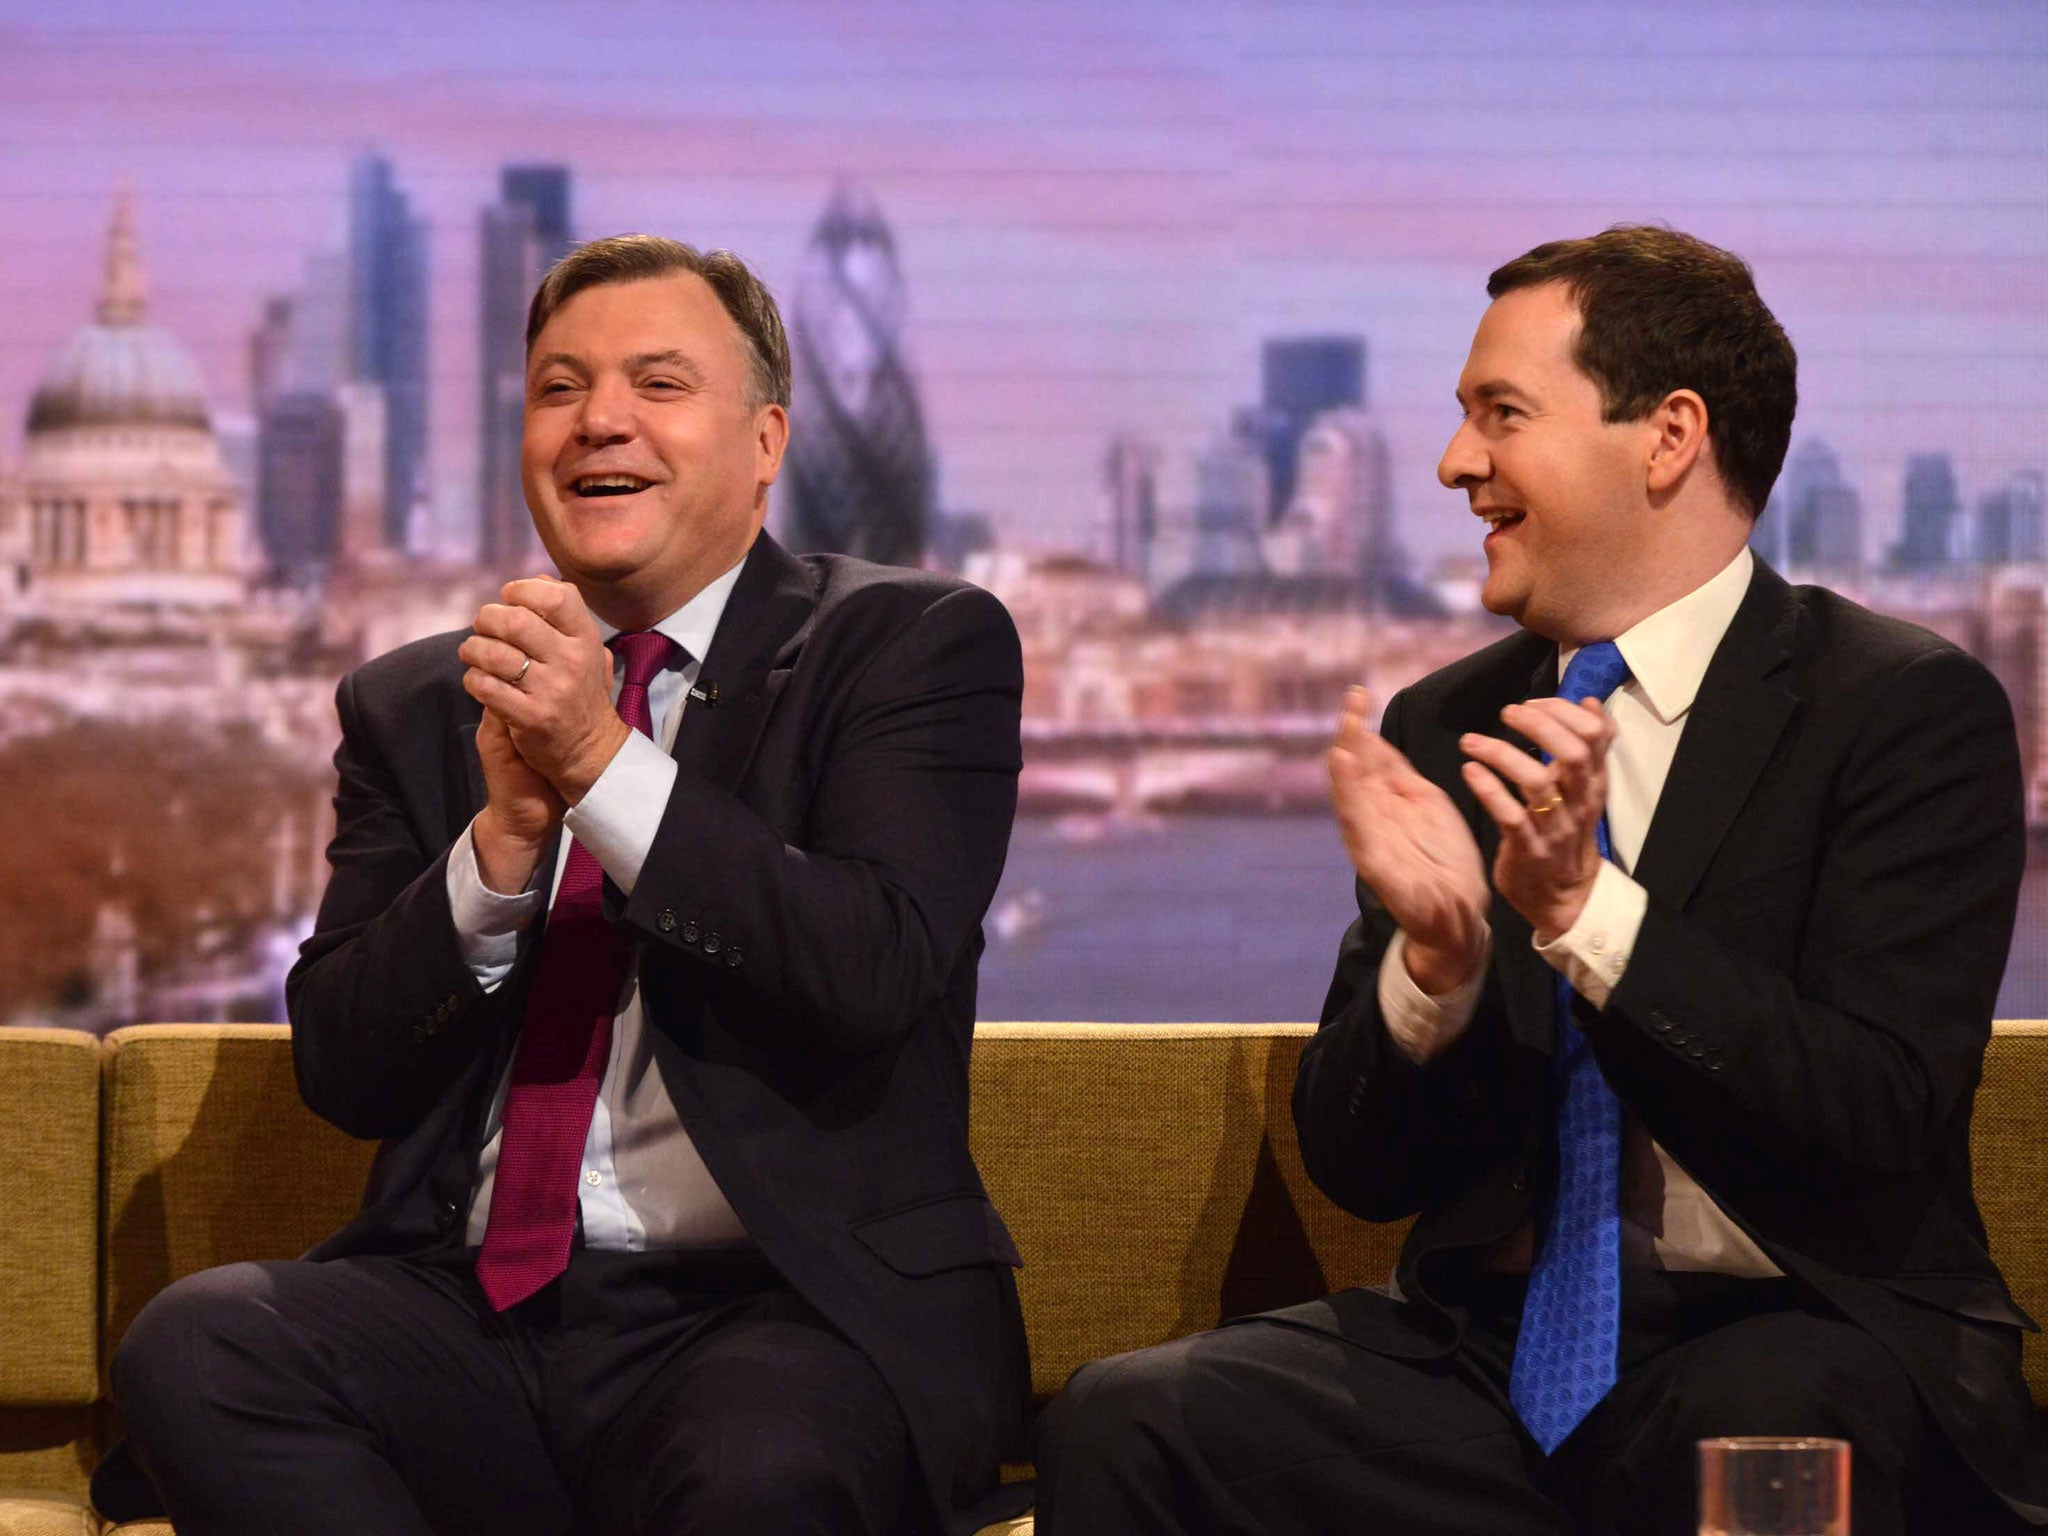 Ed Balls, left, and Chancellor George Osborne, right, share a lighter moment on ‘The Andrew Marr Show’. Warning Mr Osborne not to boast about the recovery, Mr Balls said he would run a budget surplus in the next parliament if Labour wins the election